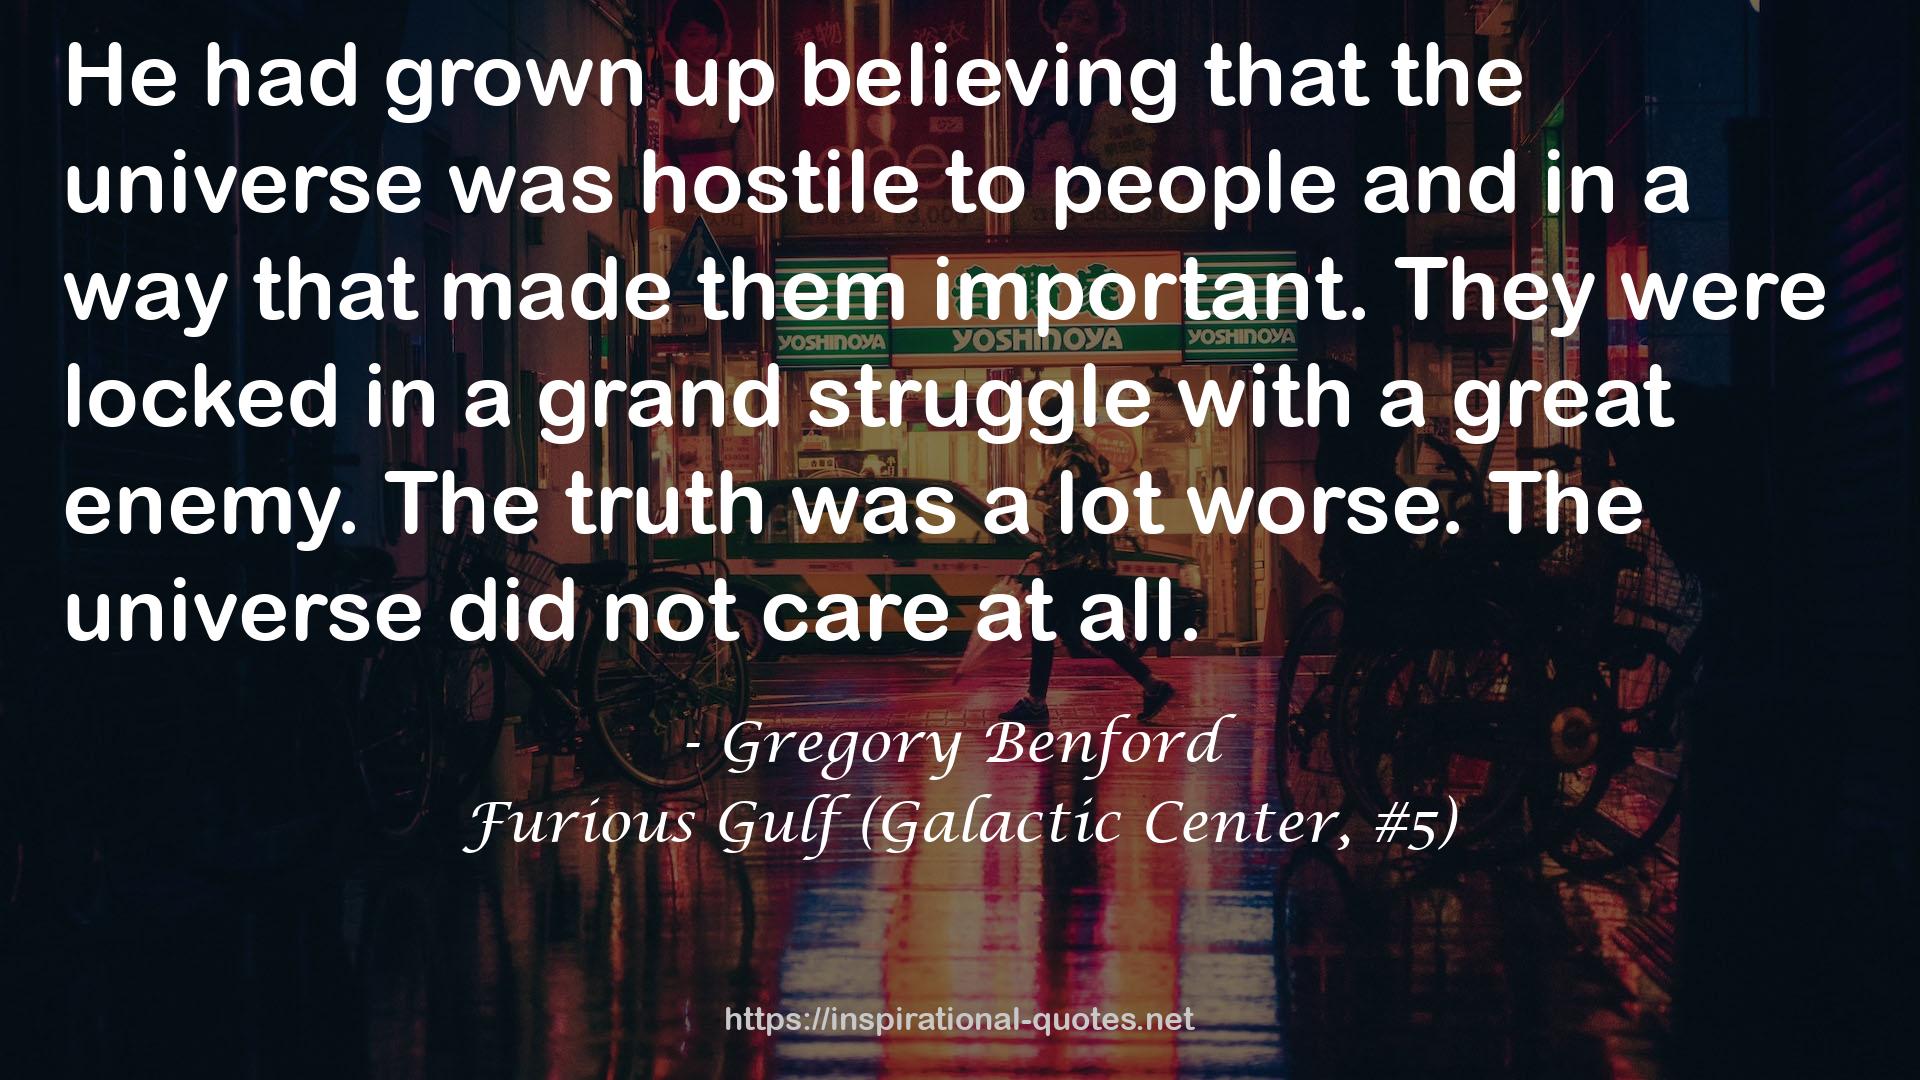 Furious Gulf (Galactic Center, #5) QUOTES